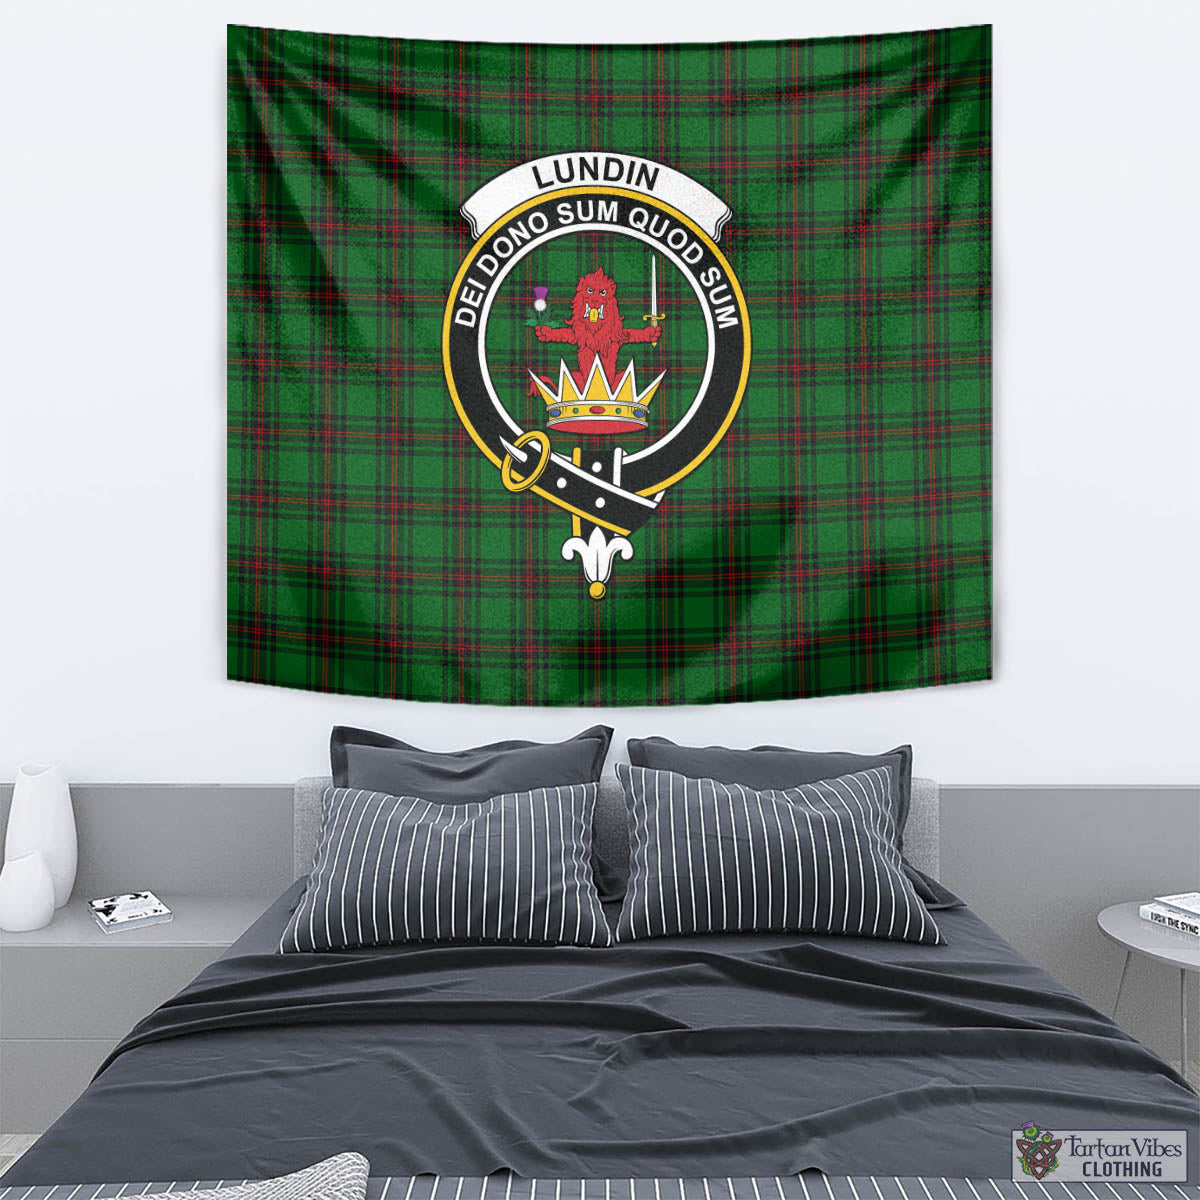 Tartan Vibes Clothing Lundin Tartan Tapestry Wall Hanging and Home Decor for Room with Family Crest